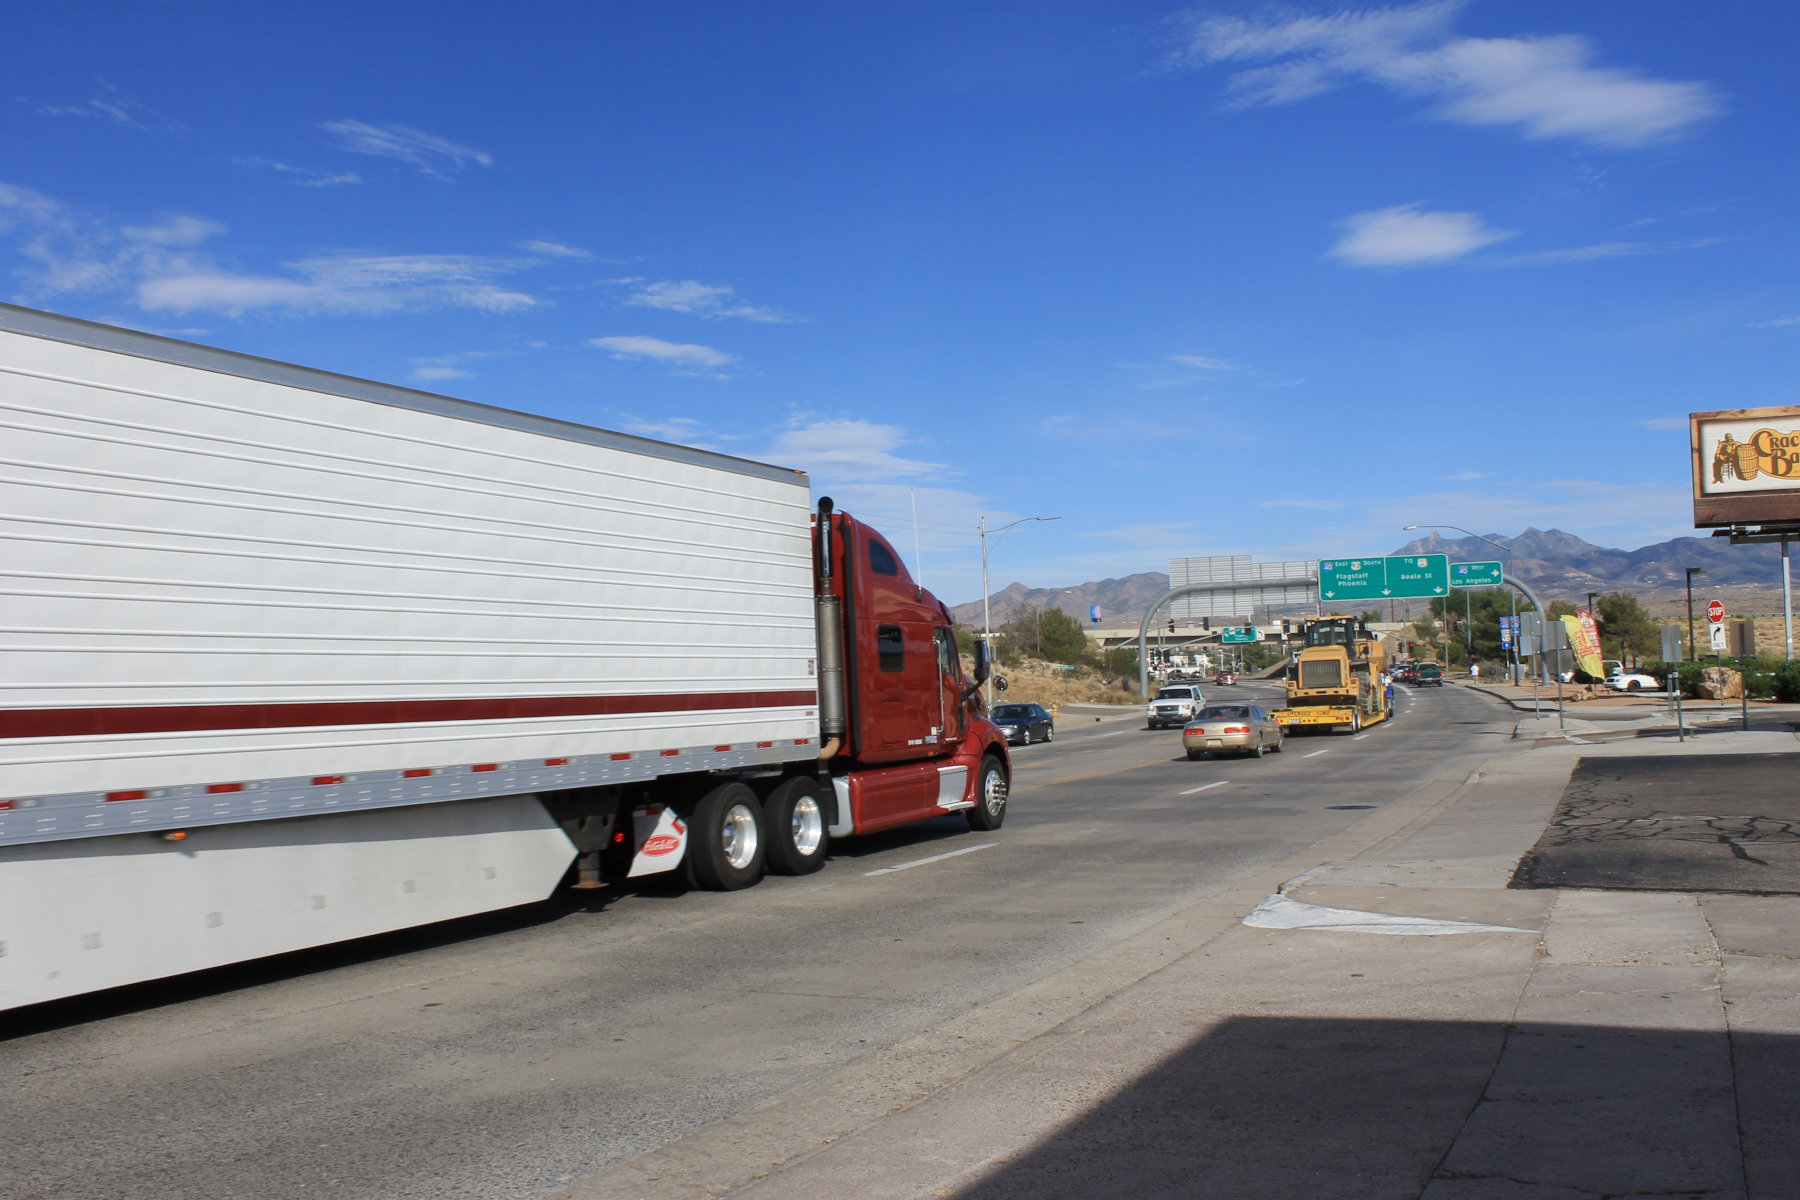 Appraising the Operations of Commercial Big Rig Trucks